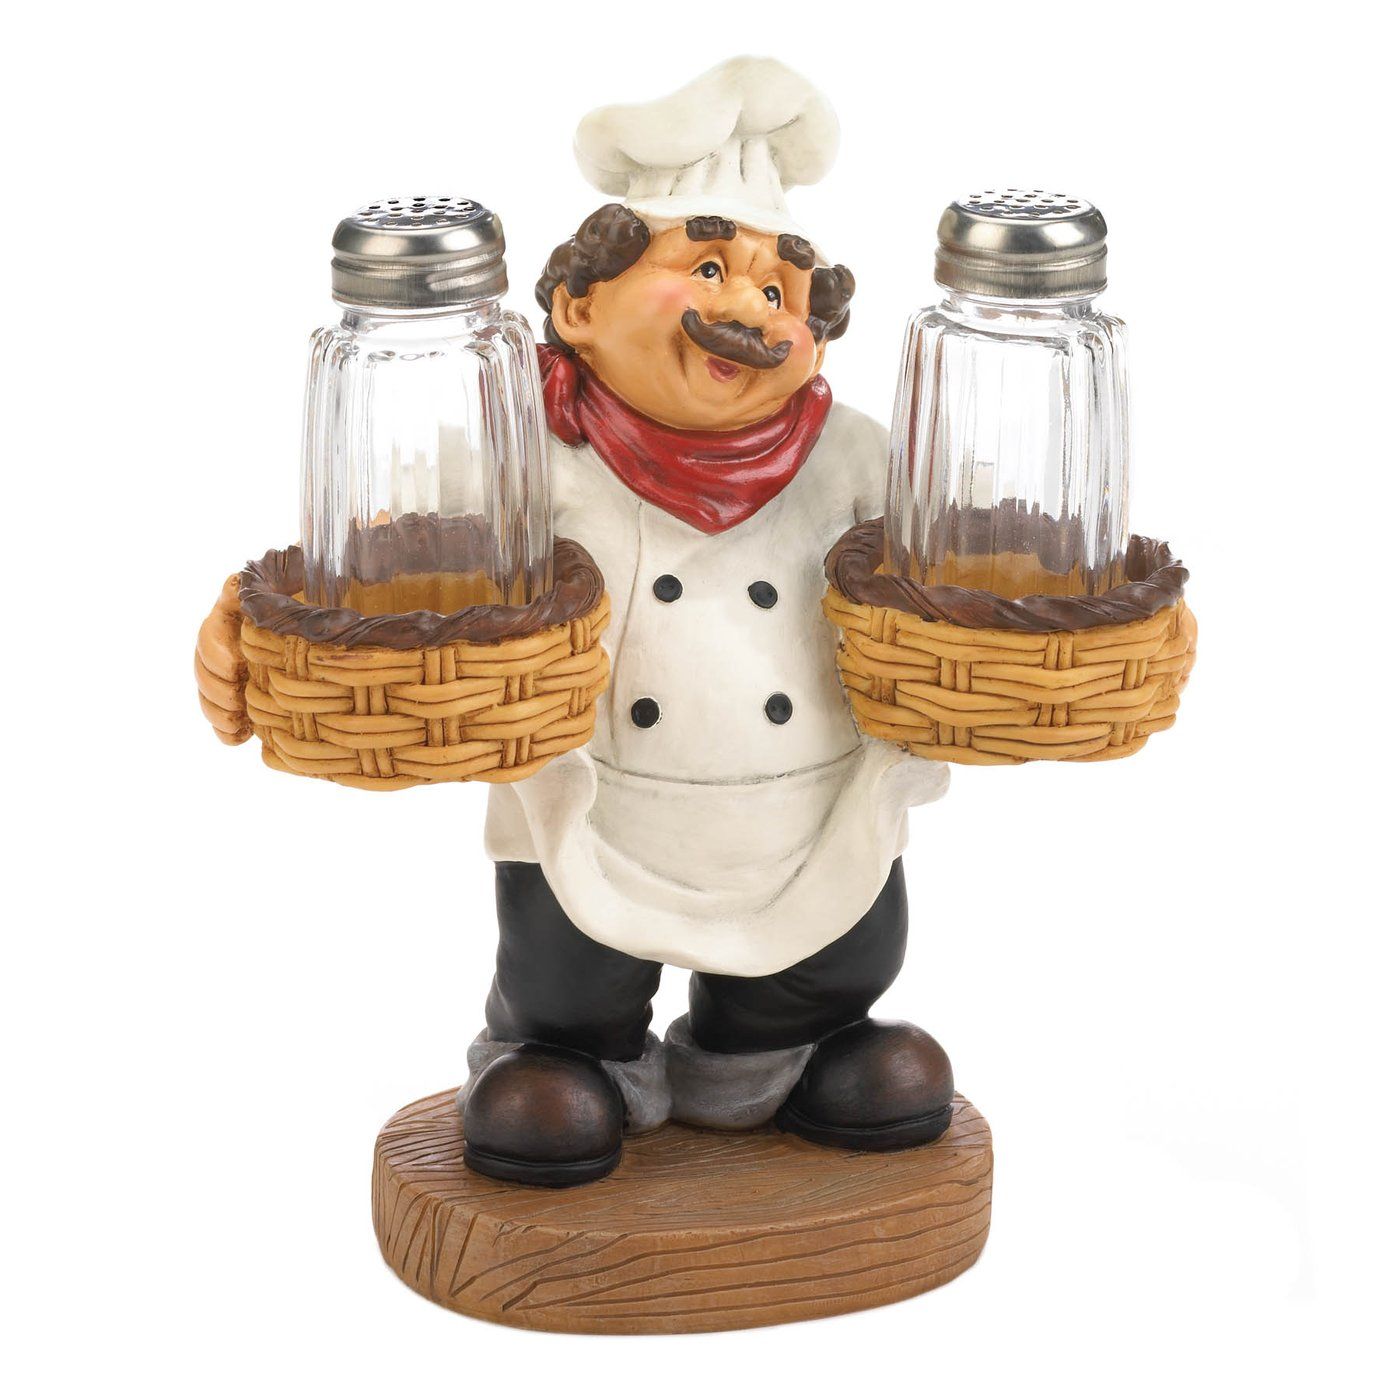 How Can I Display Salt And Pepper Shakers?